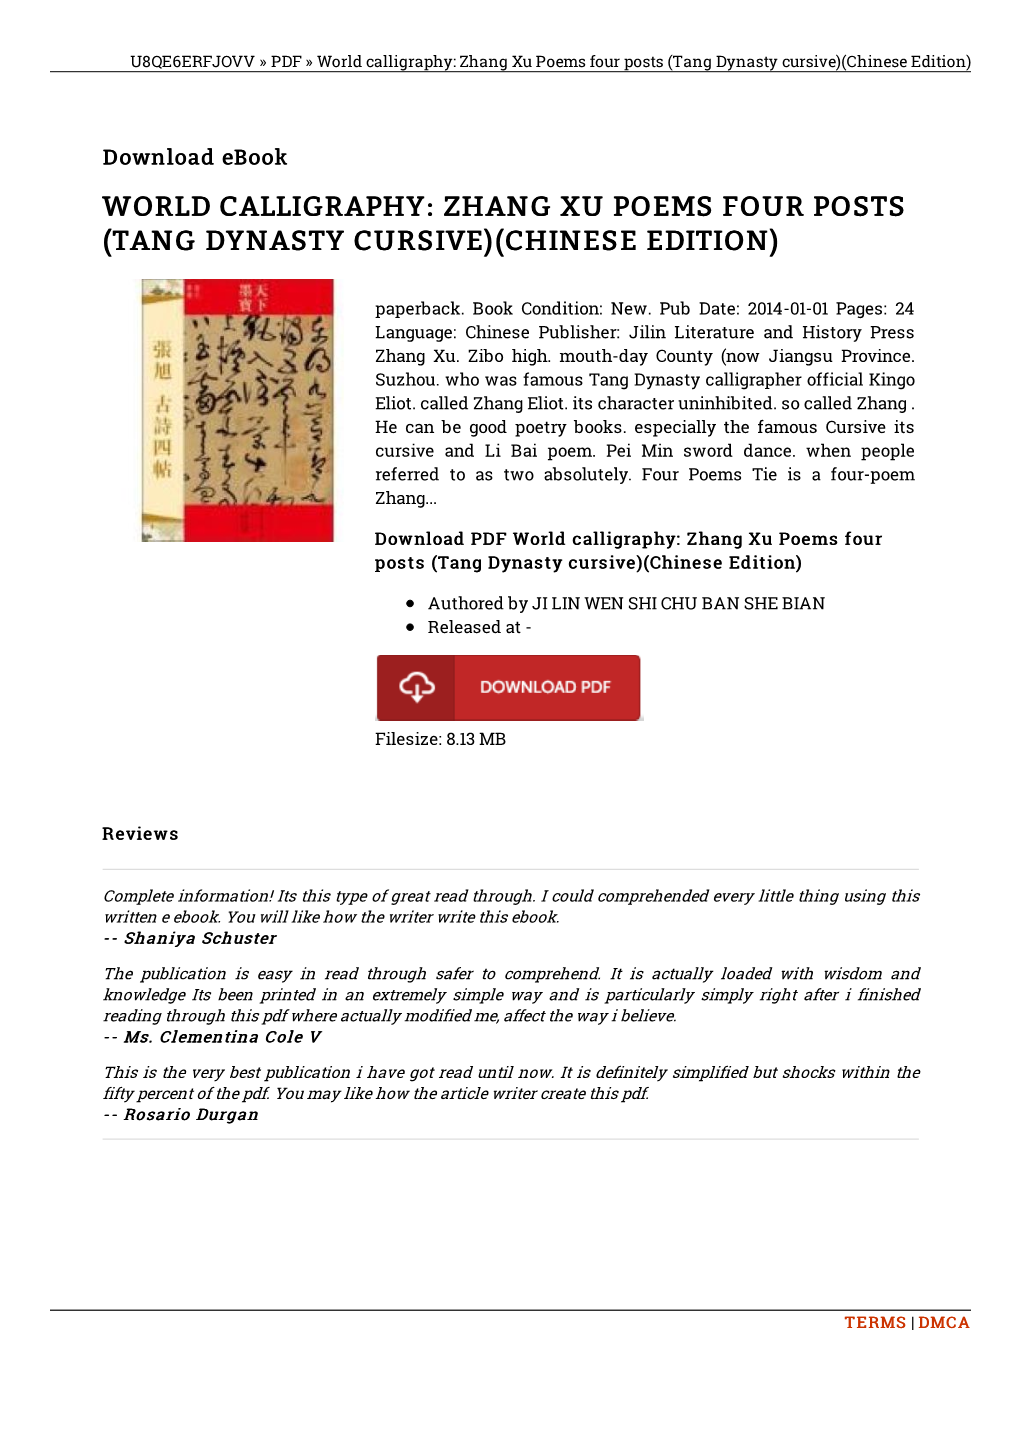 Read PDF World Calligraphy: Zhang Xu Poems Four Posts (Tang Dynasty